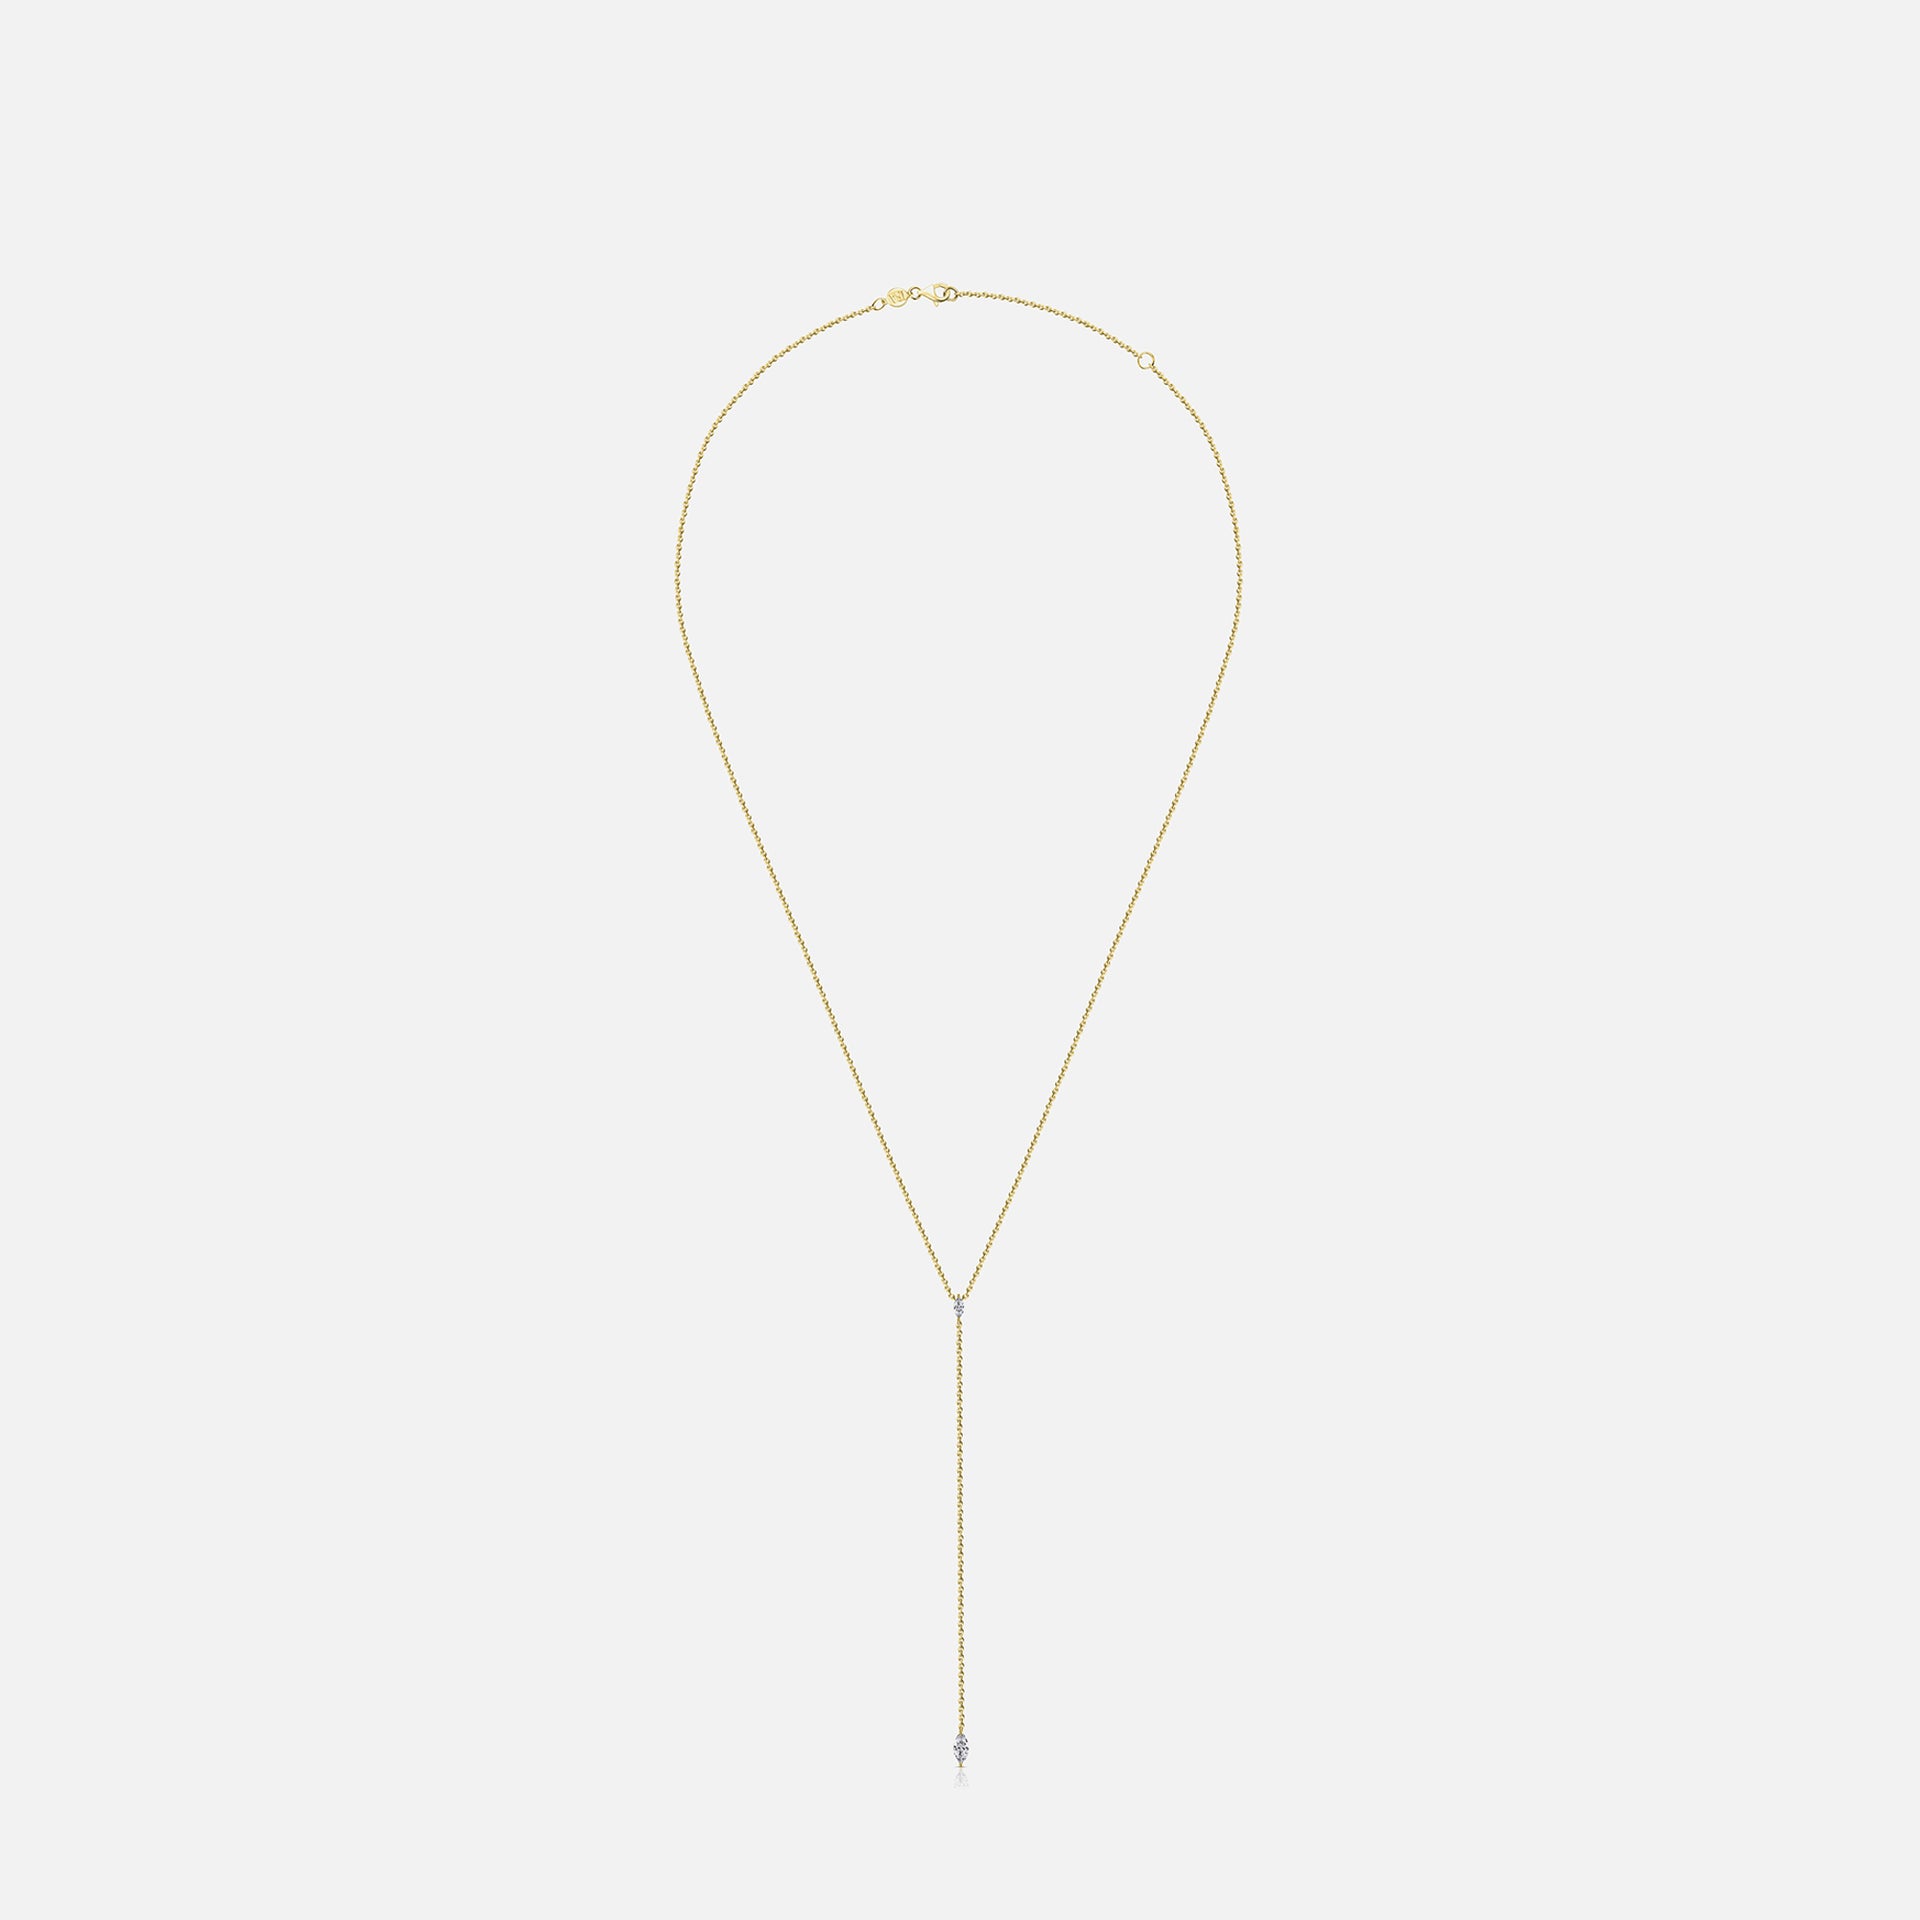 Isa Grutman Marquis Lariat Necklace 14K Gold - Yellow Gold